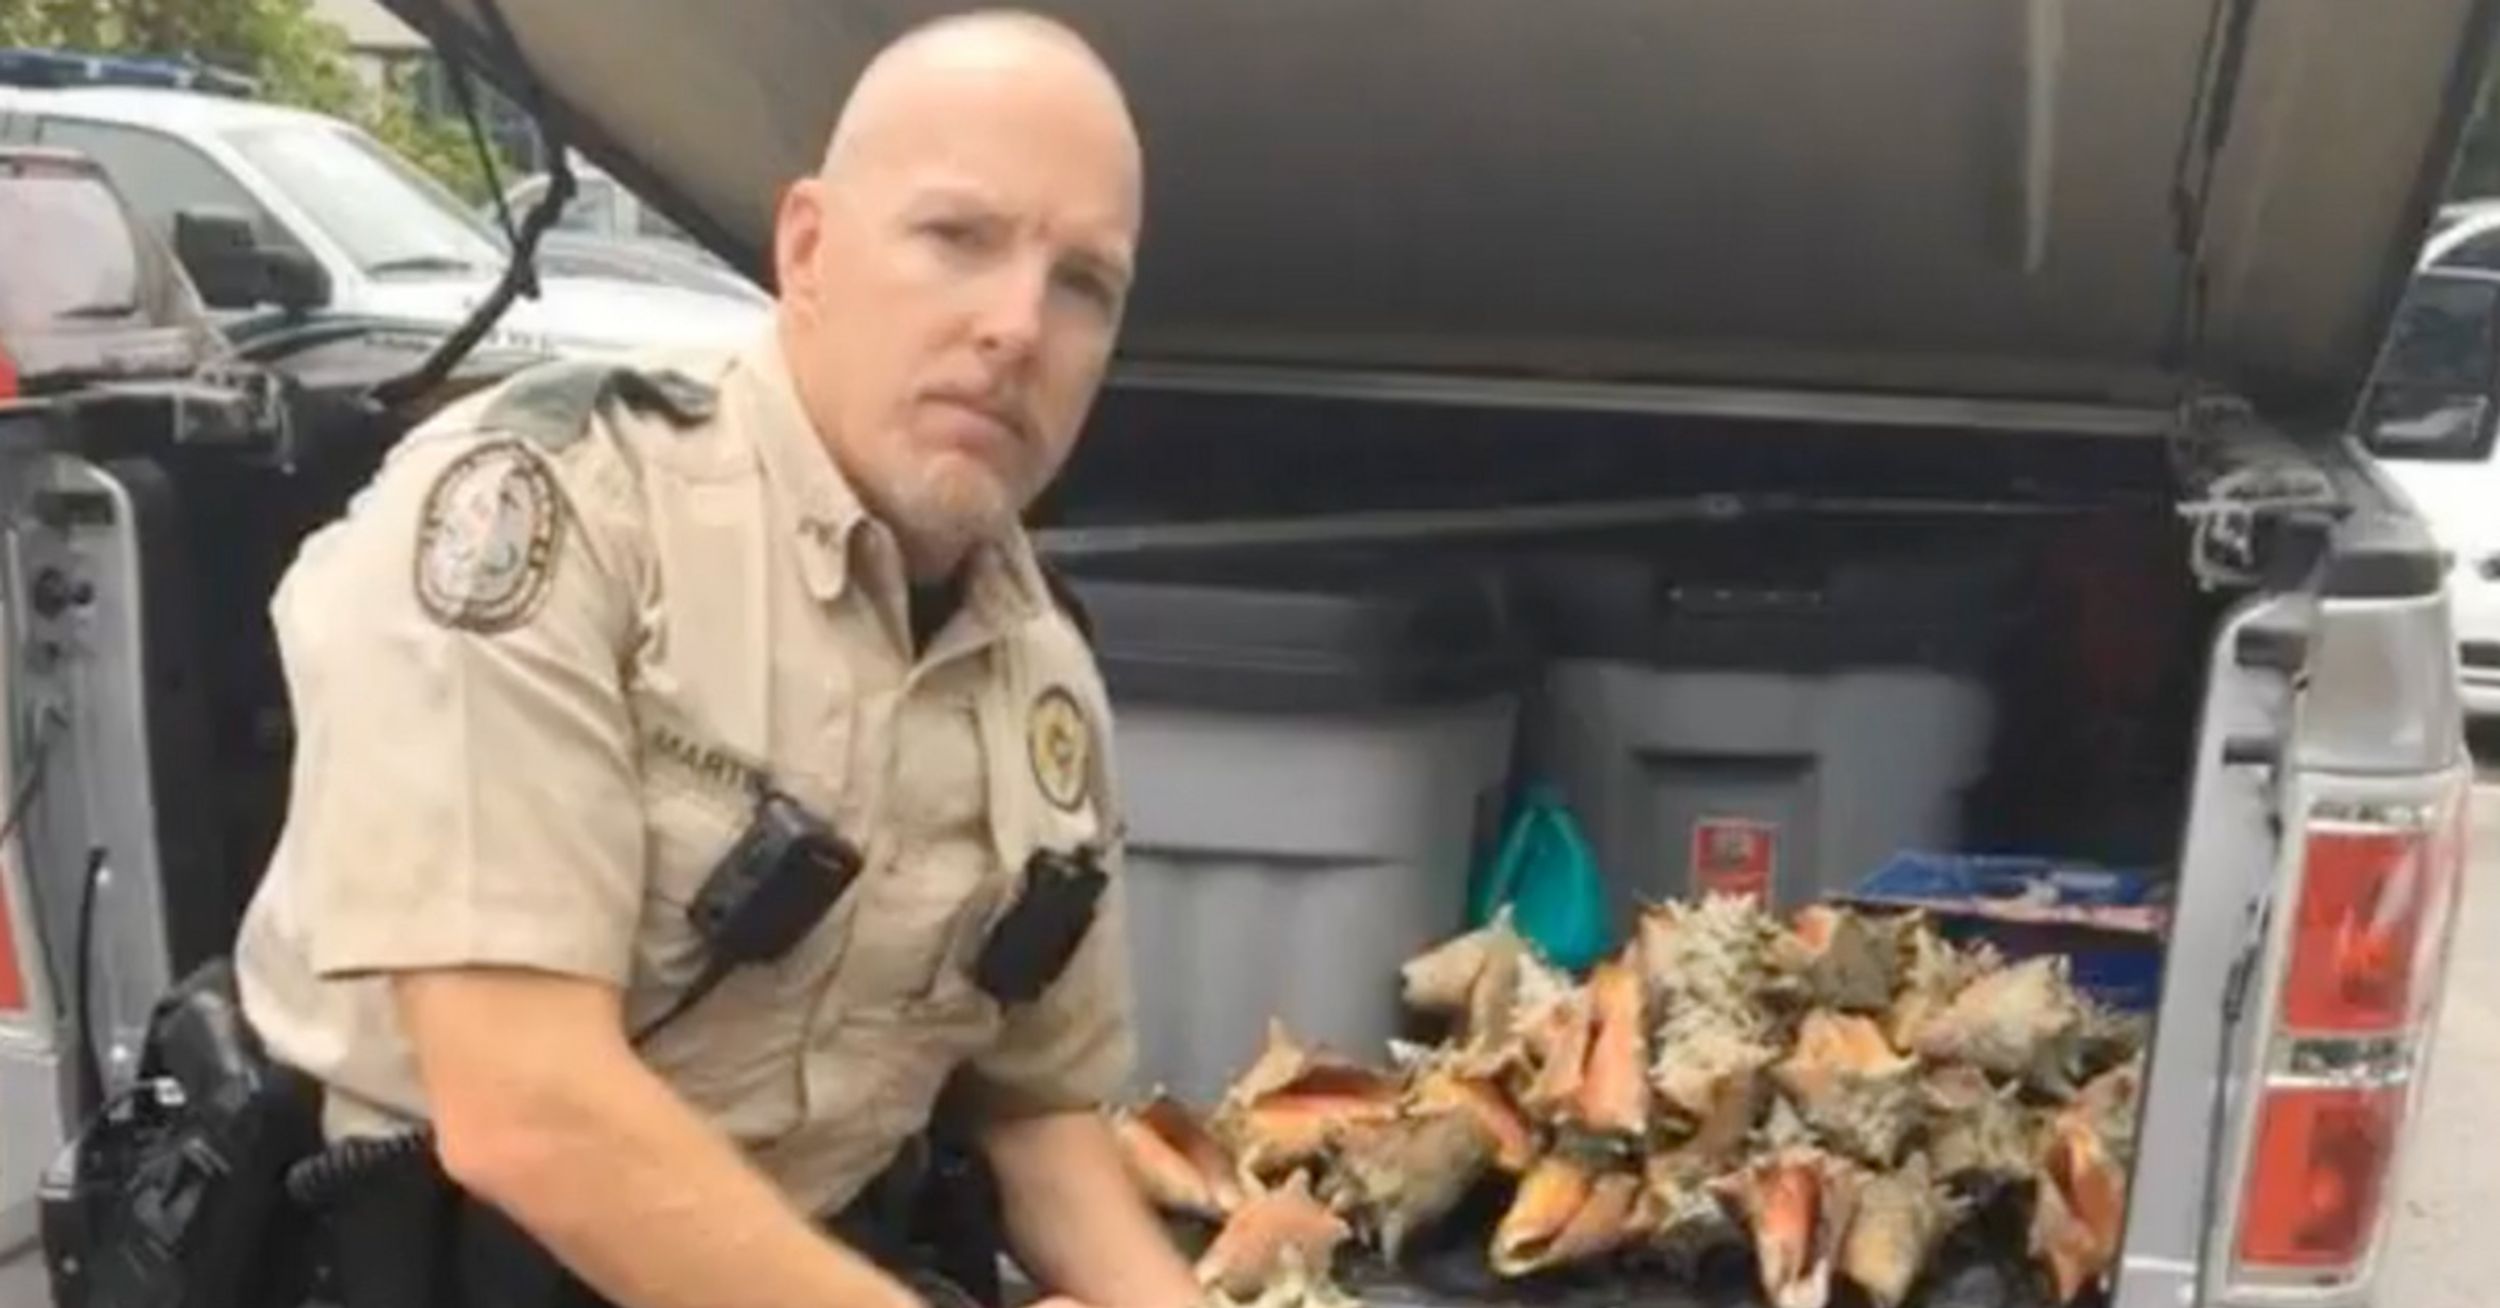 Why This Woman Was Arrested For Collecting Mollusks On The Beach In Florida Is A Surprise To Many